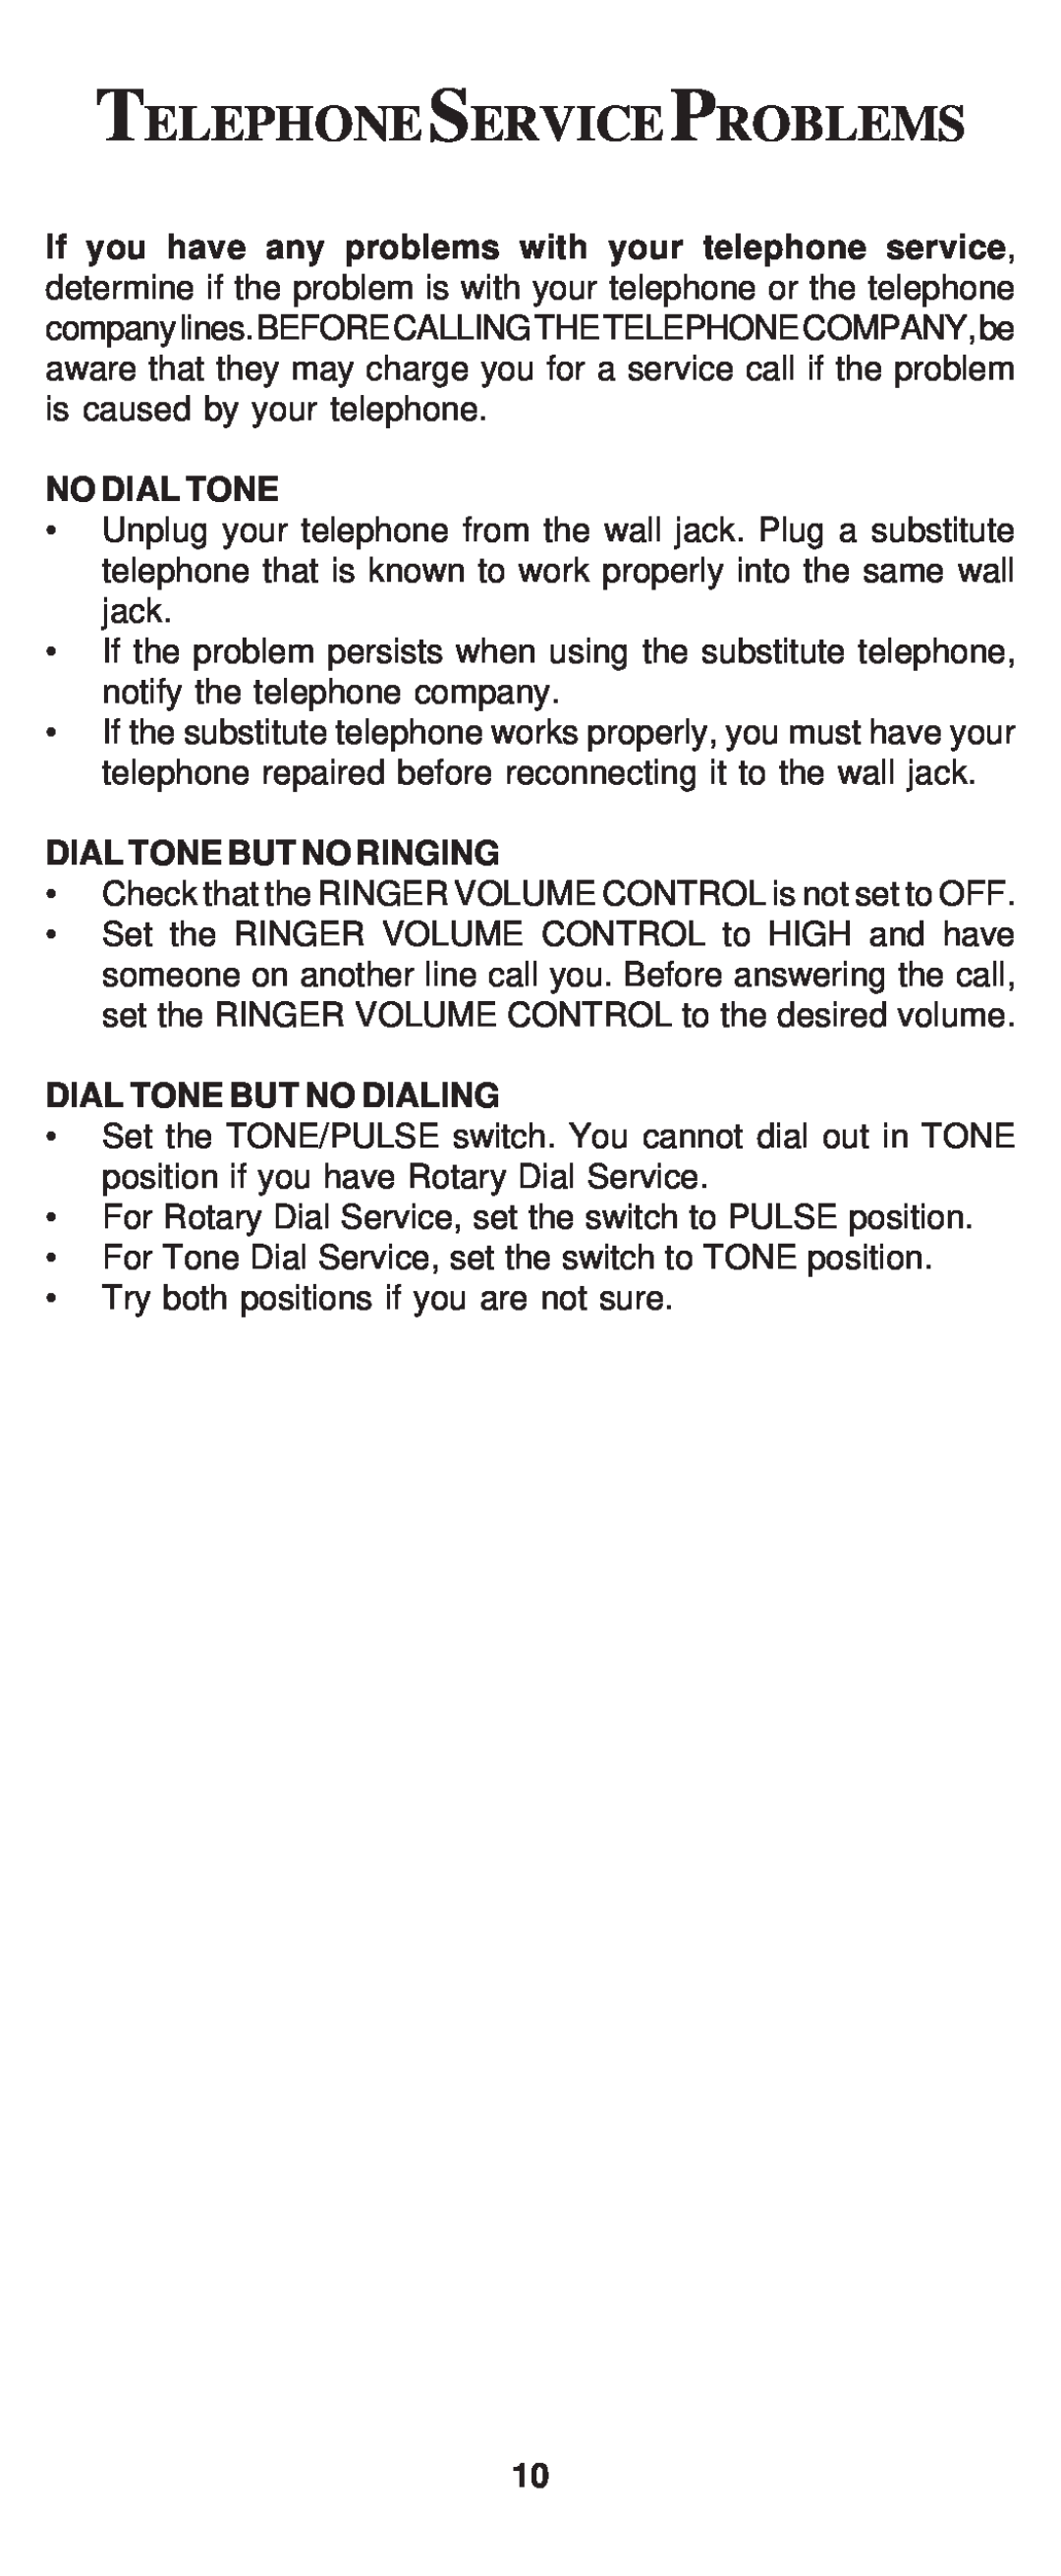 Cortelco 8150 instruction manual Telephoneserviceproblems, No Dial Tone, Dial Tone But No Ringing, Dial Tone But No Dialing 